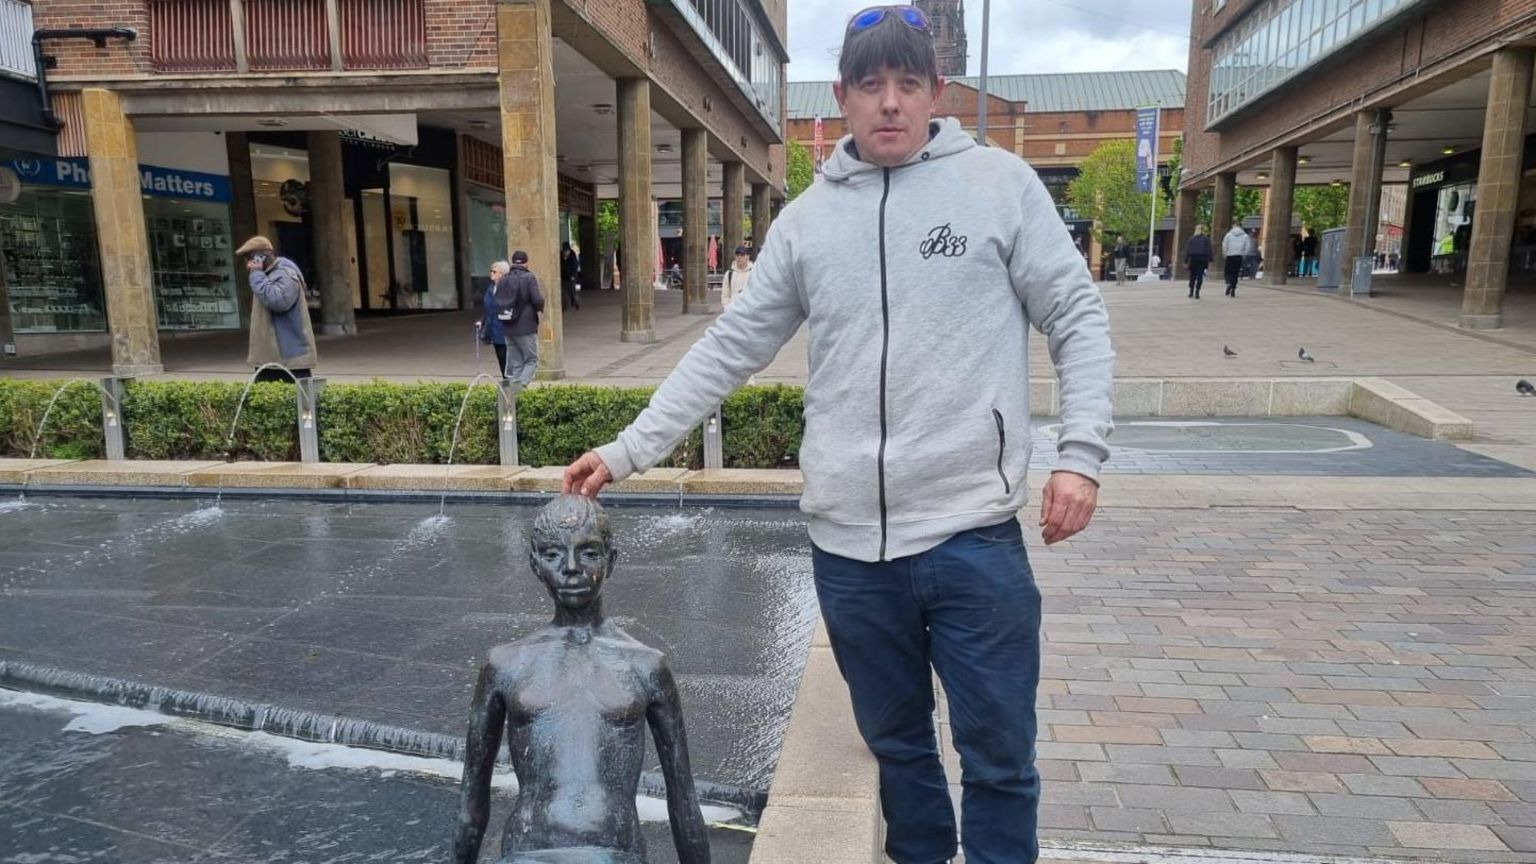 The Naiad statue in Coventry and a man next to it